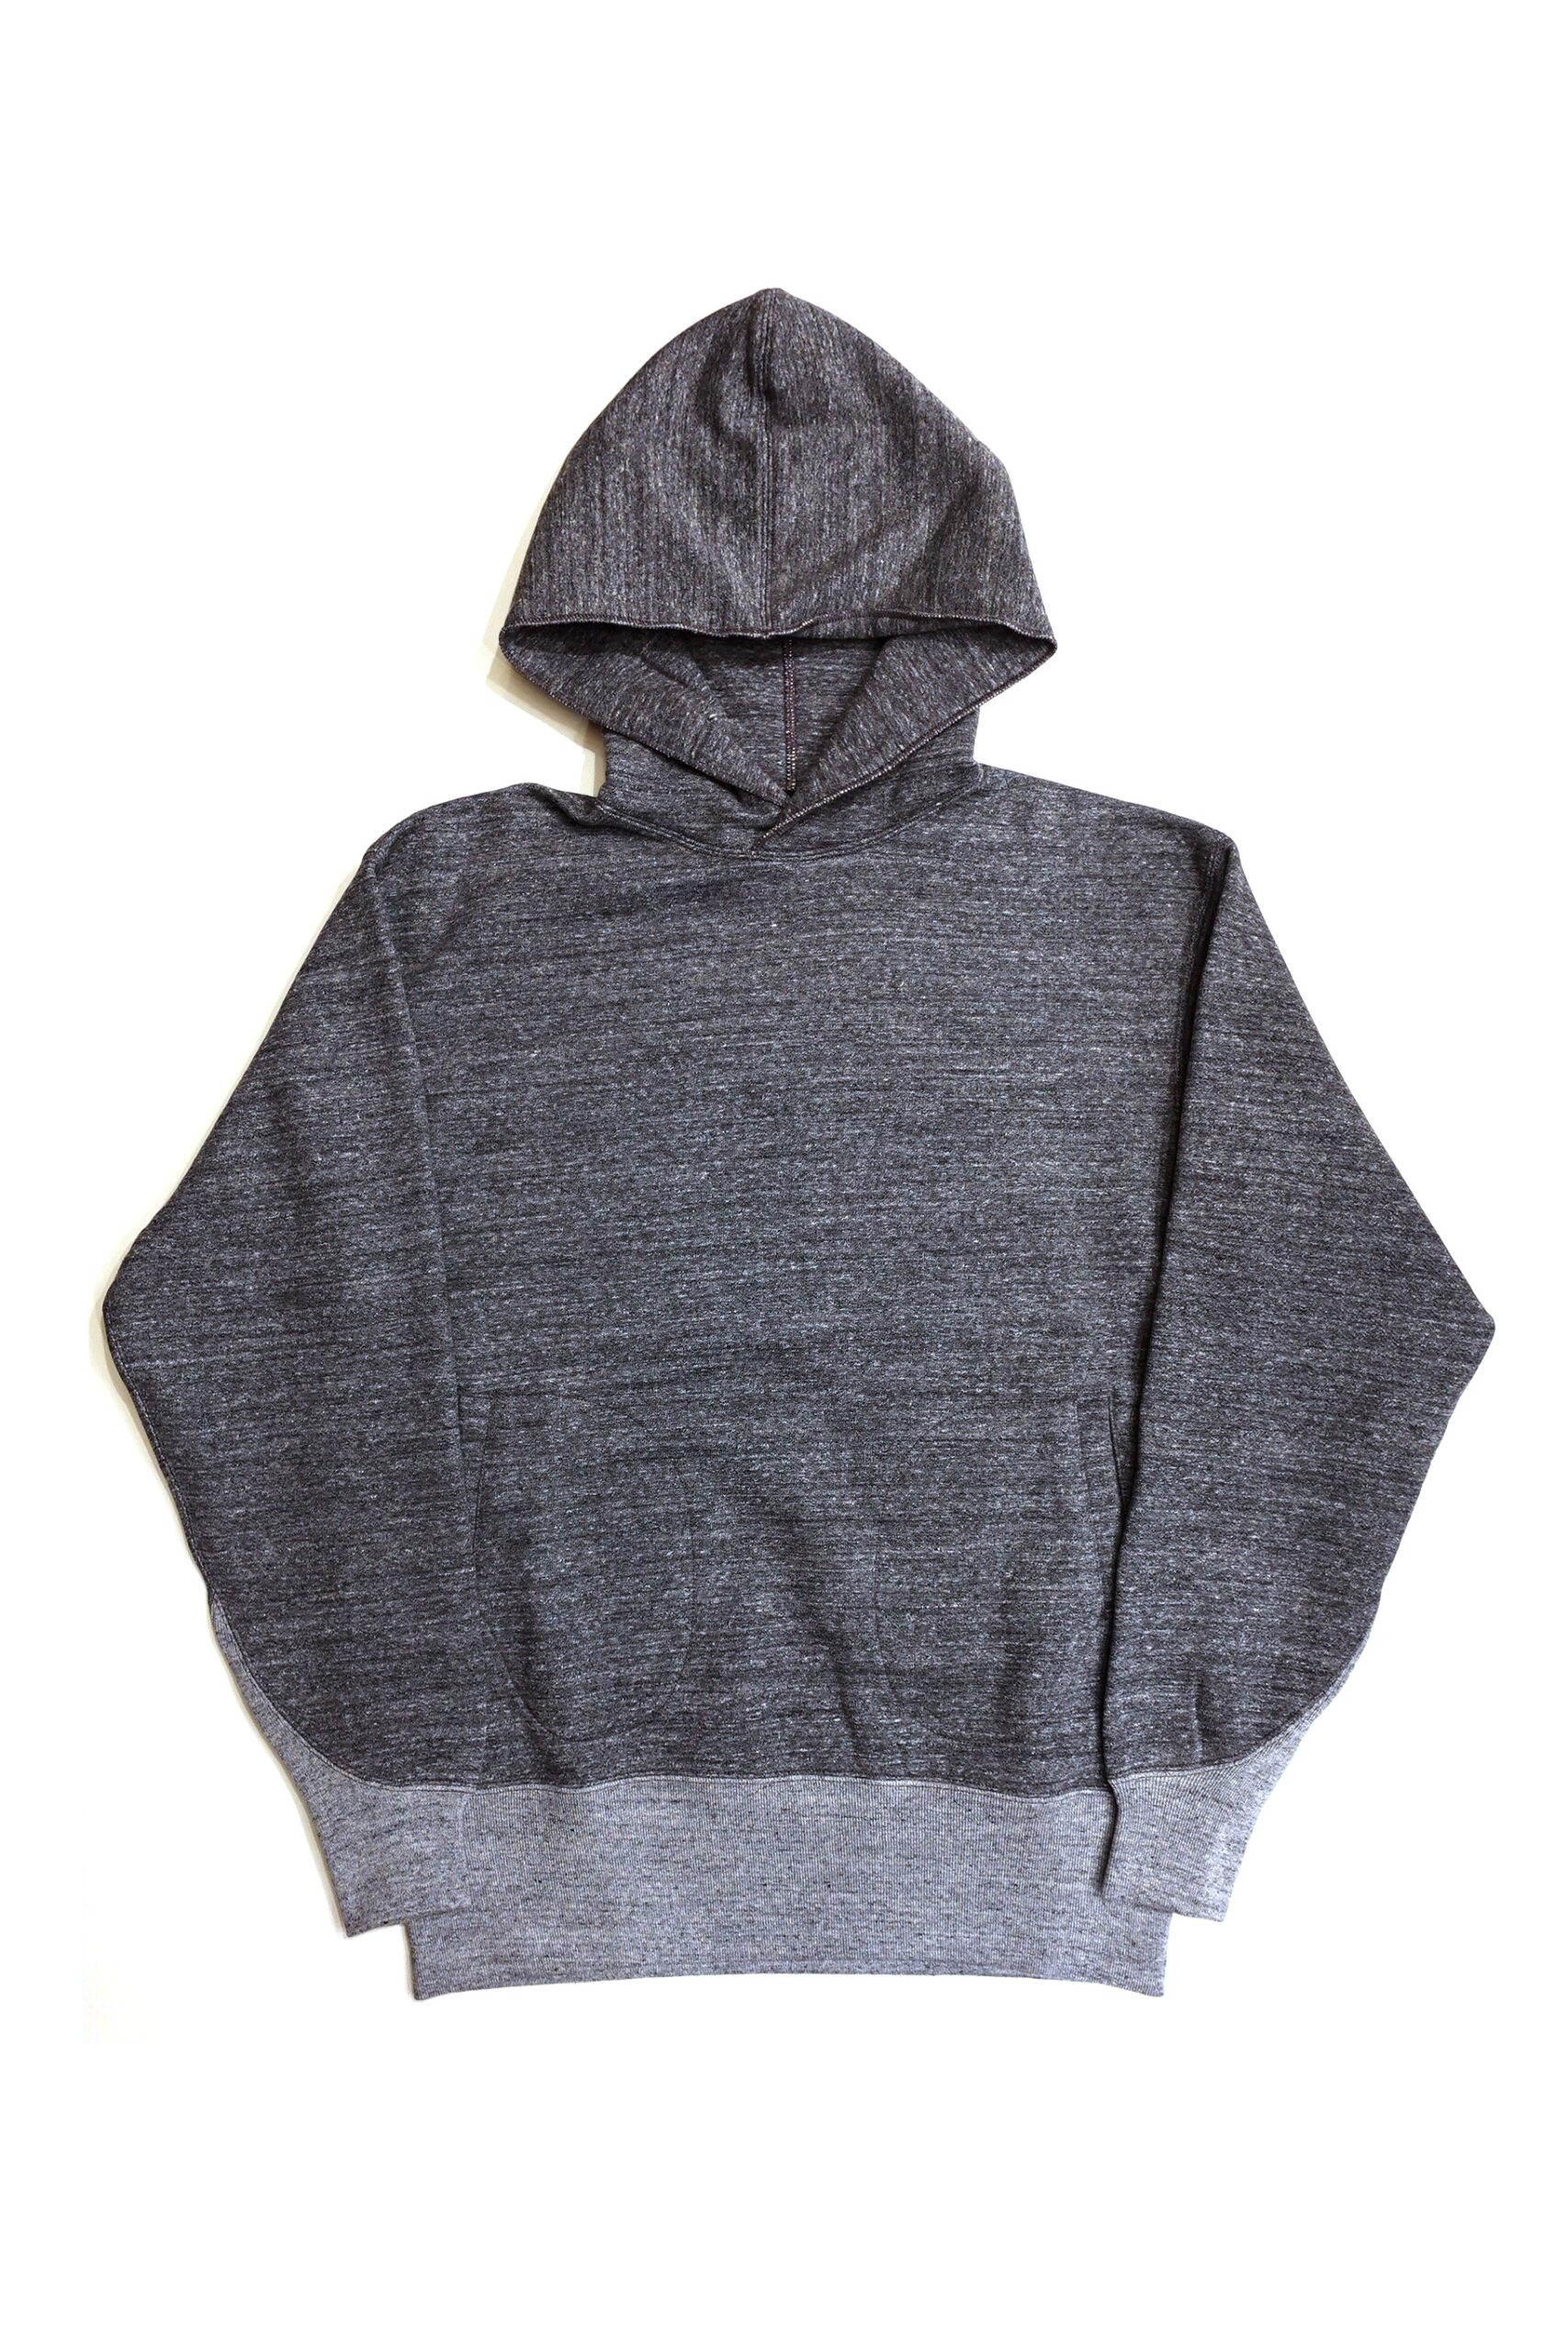 2334009 / GRAINED CHARCOAL GRAY×MIX GRAY